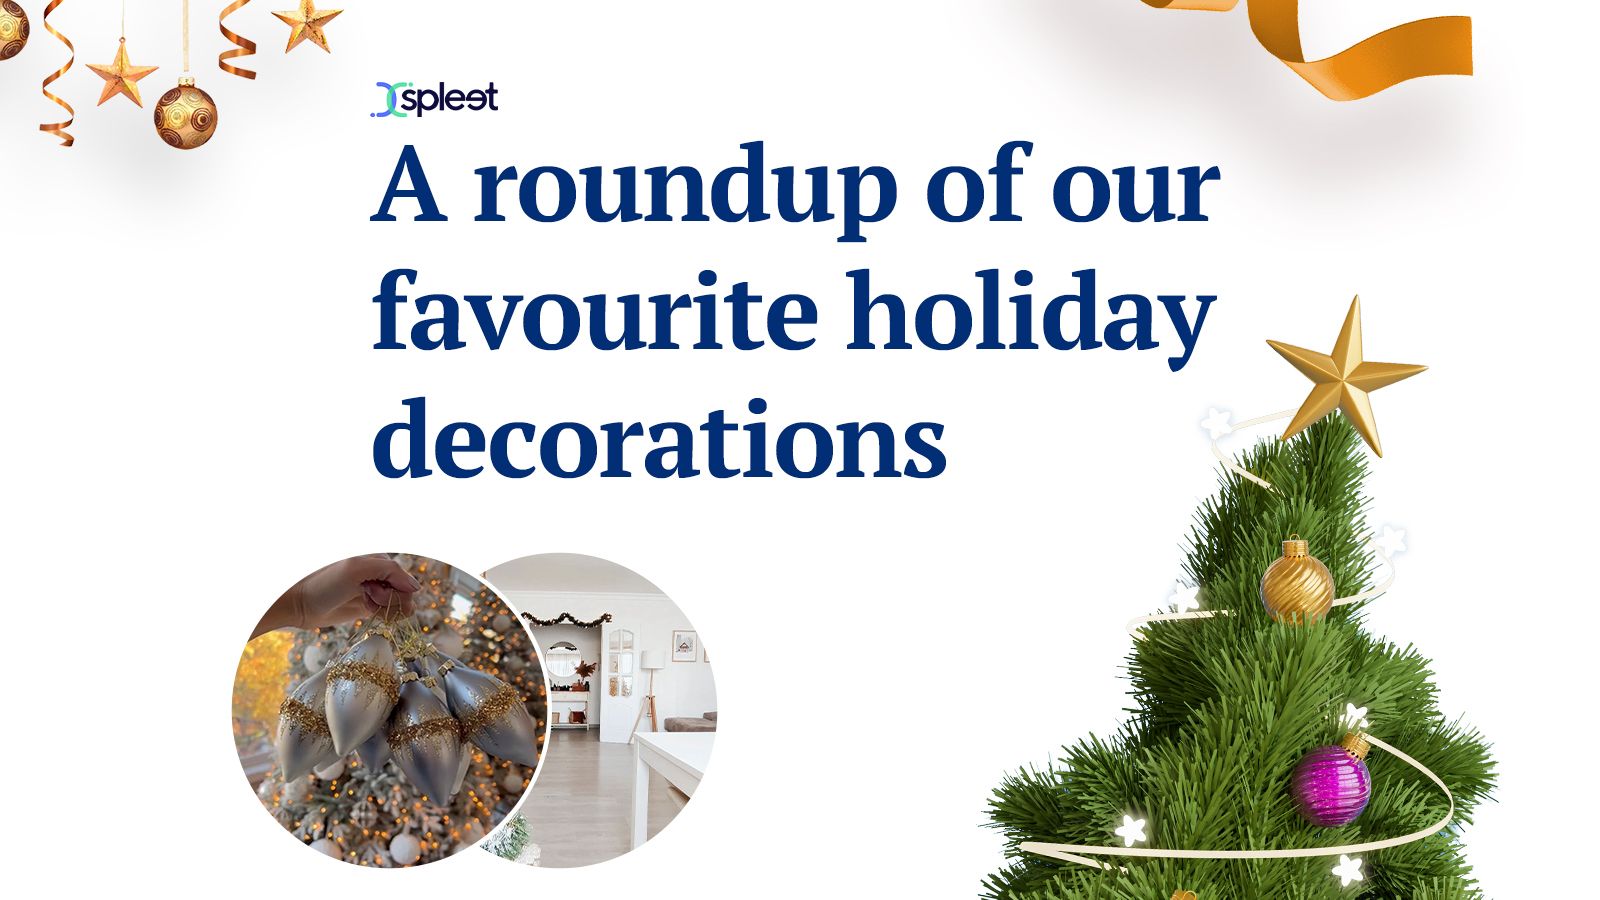 A roundup of some of our favourite holiday decorations